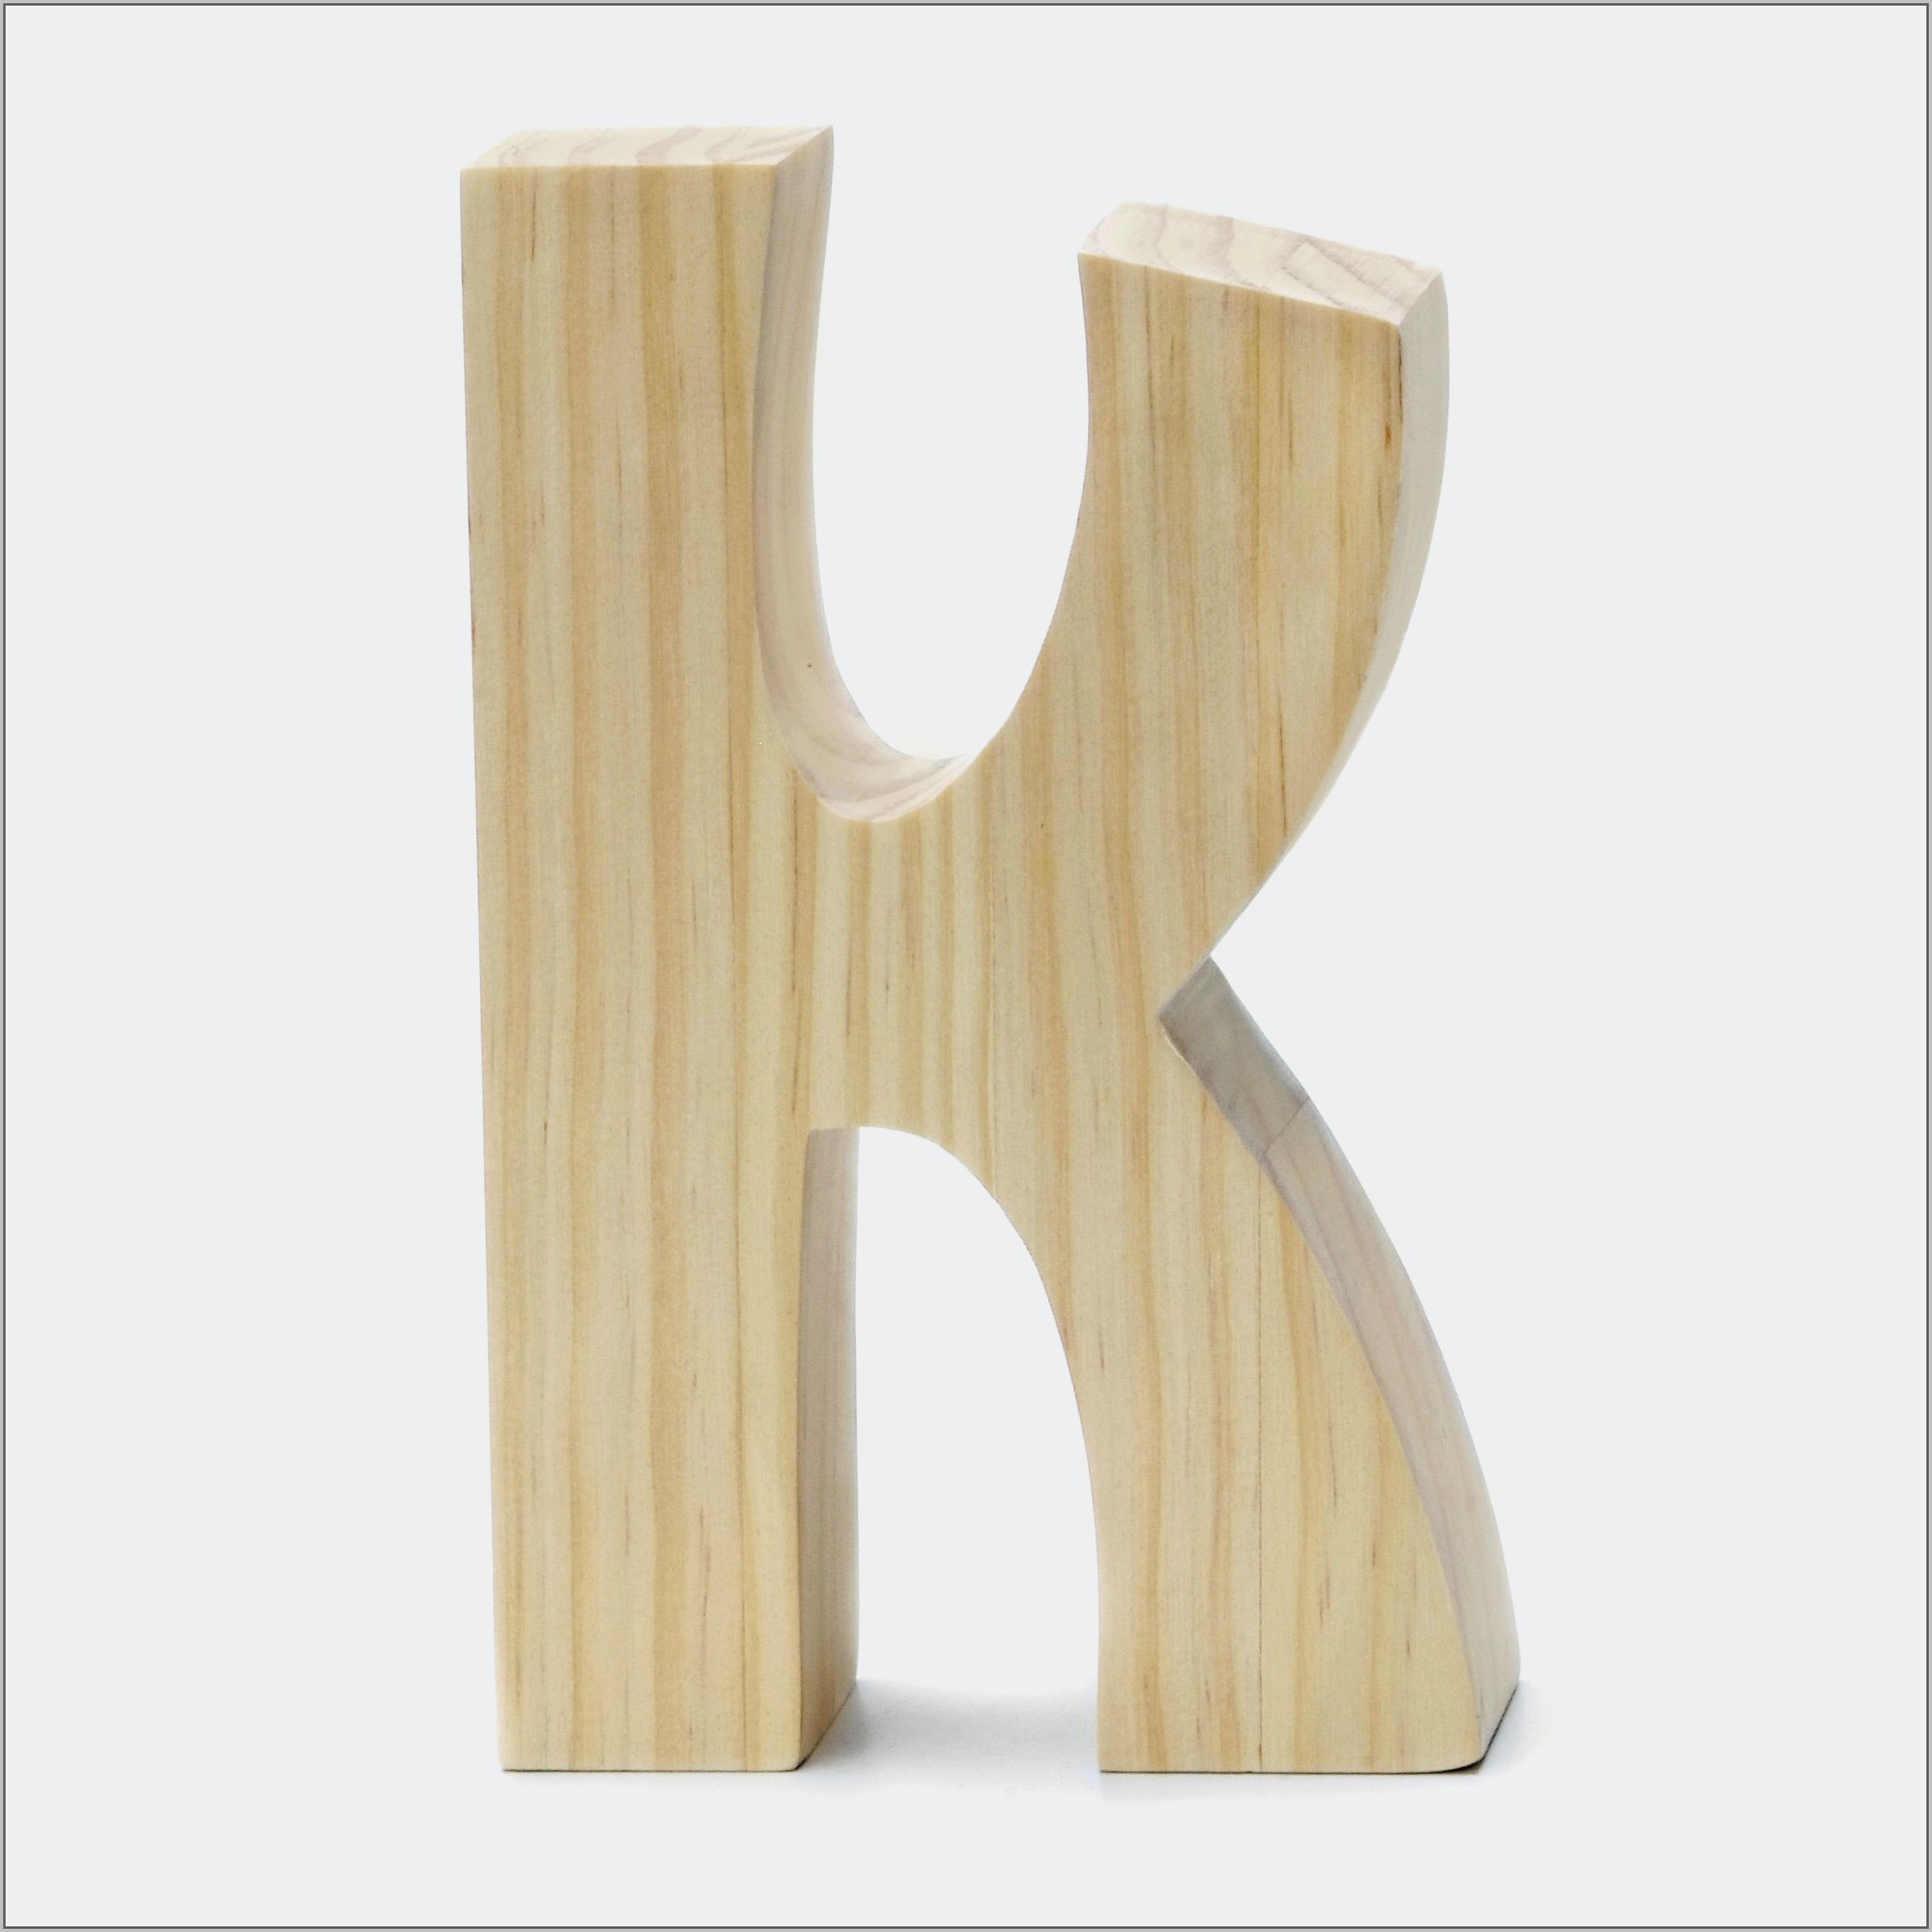 2 Inch Wooden Letters For Crafts